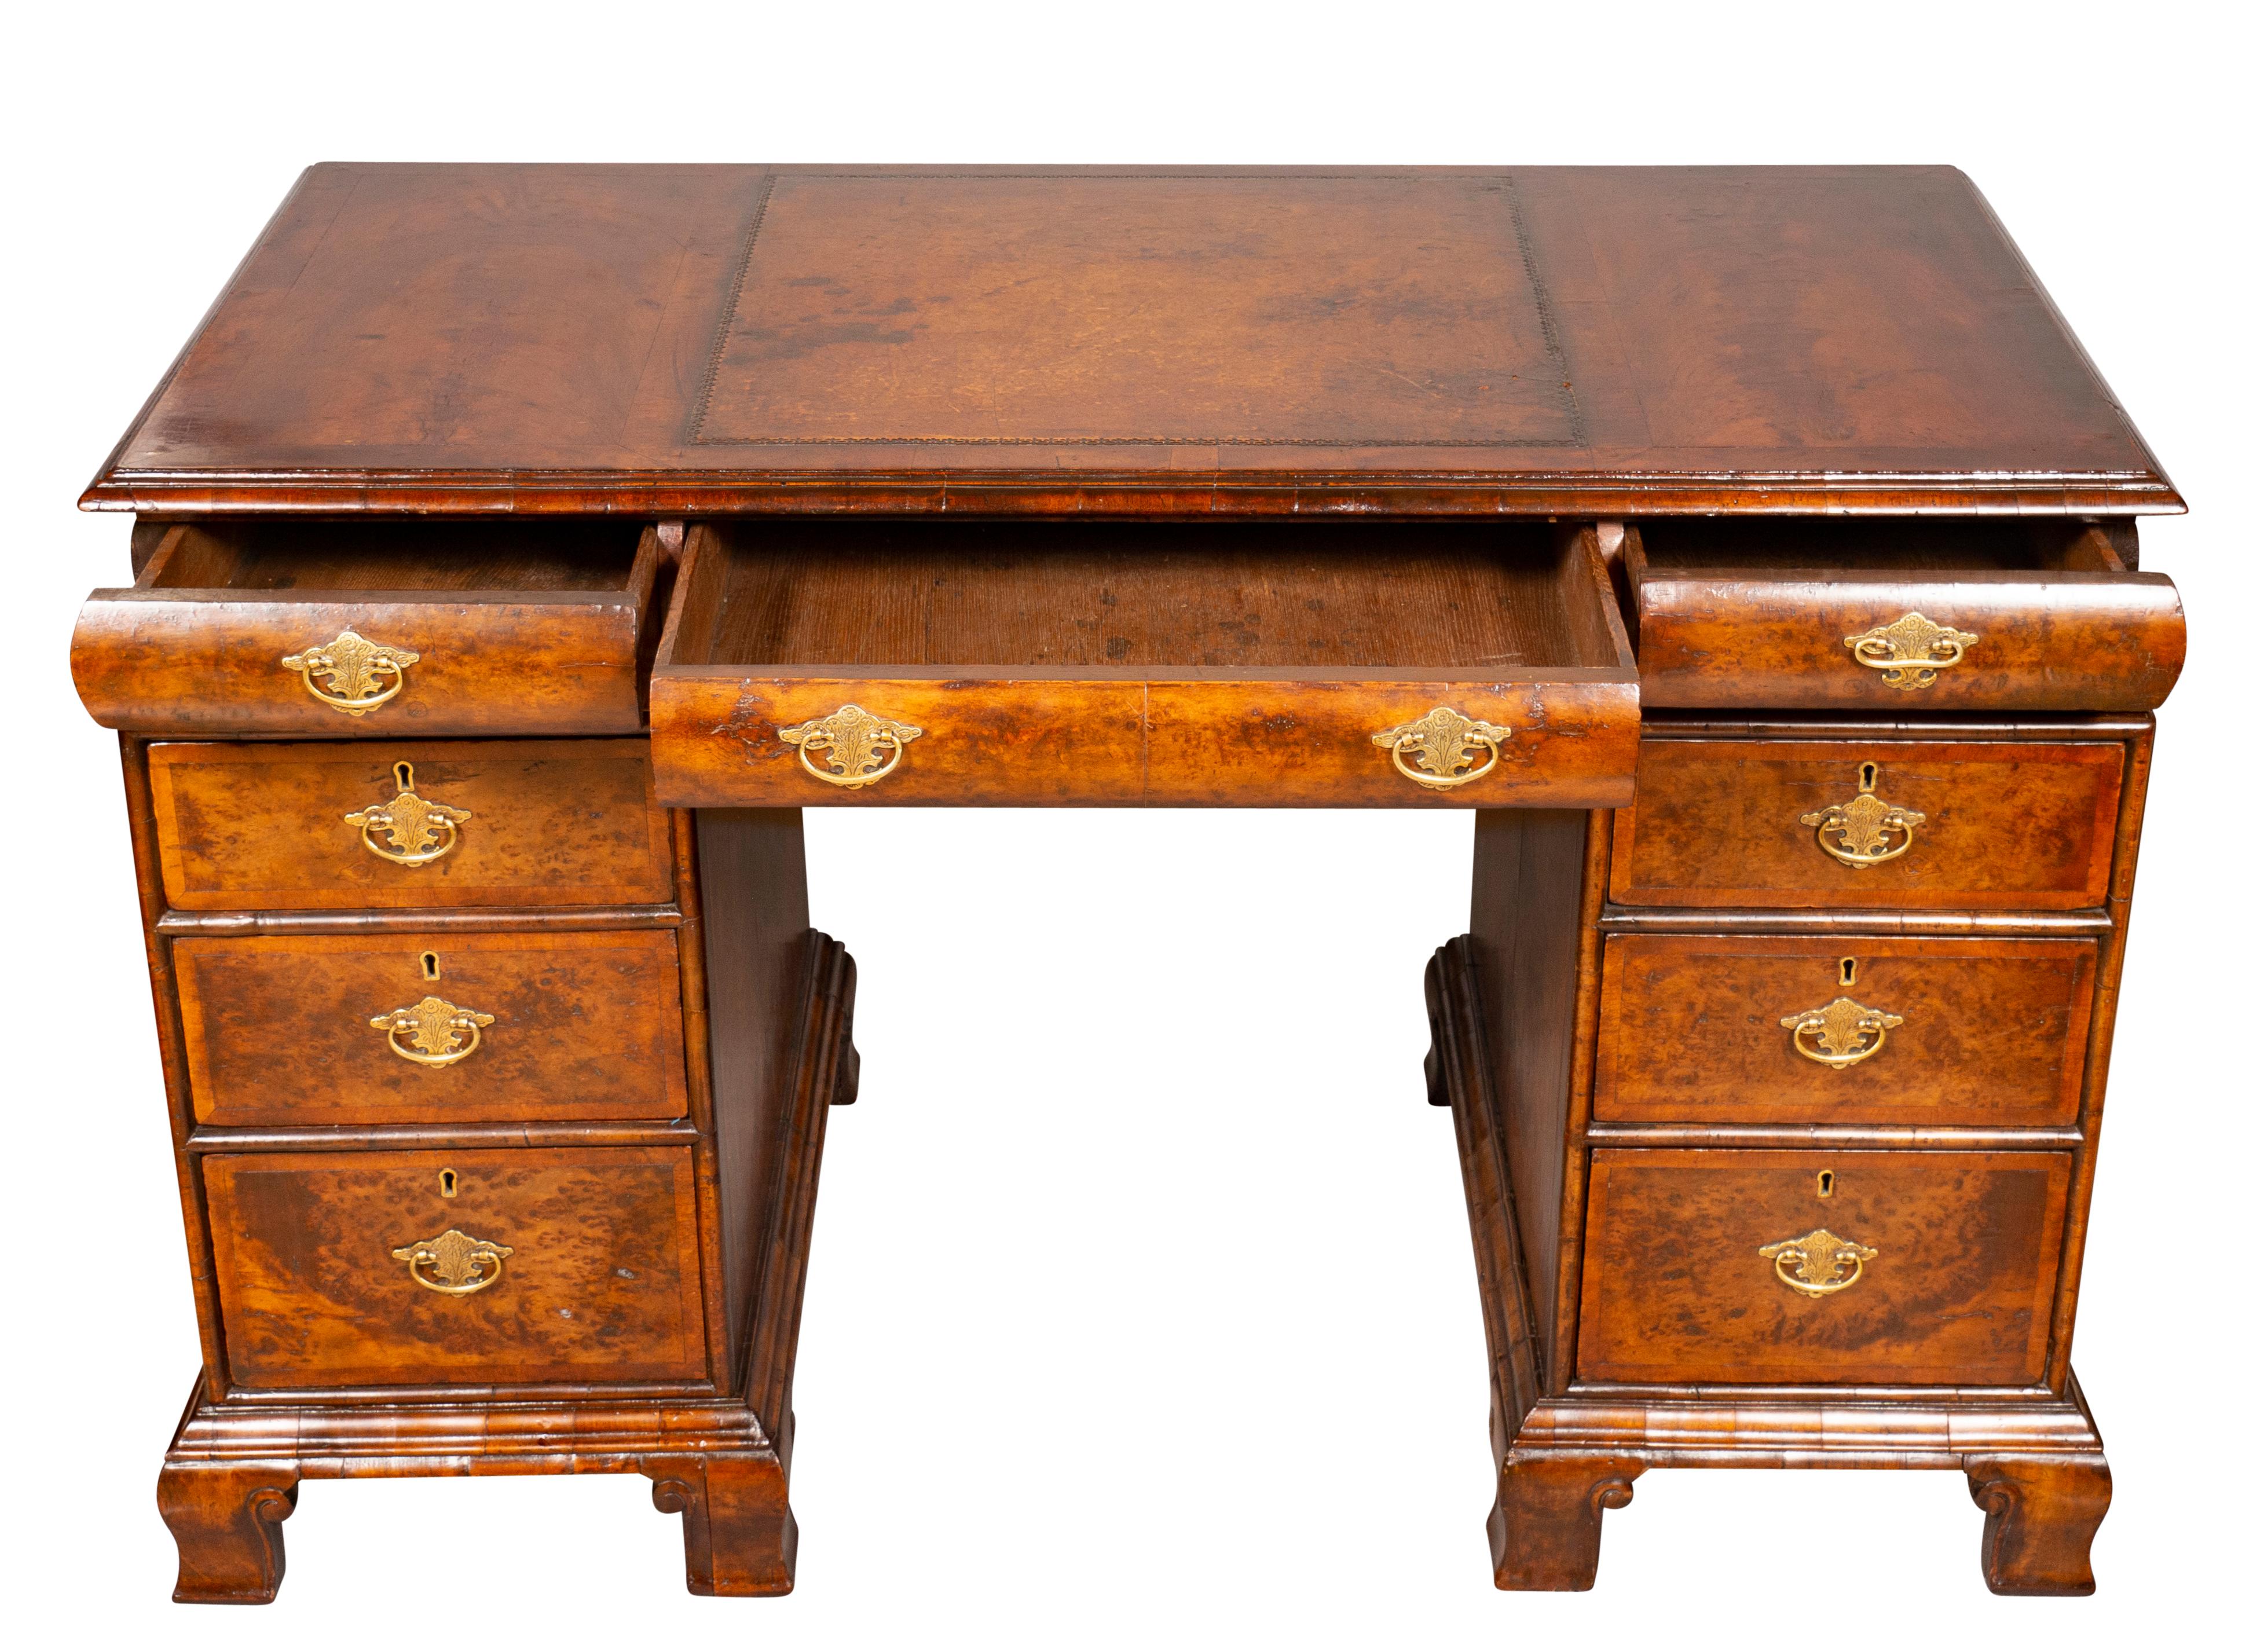 Rectangular top with inset brown leather over a cushion frieze with three drawers, the reverse finished but no drawers, pedestal base each containing three drawers. Bracket feet.